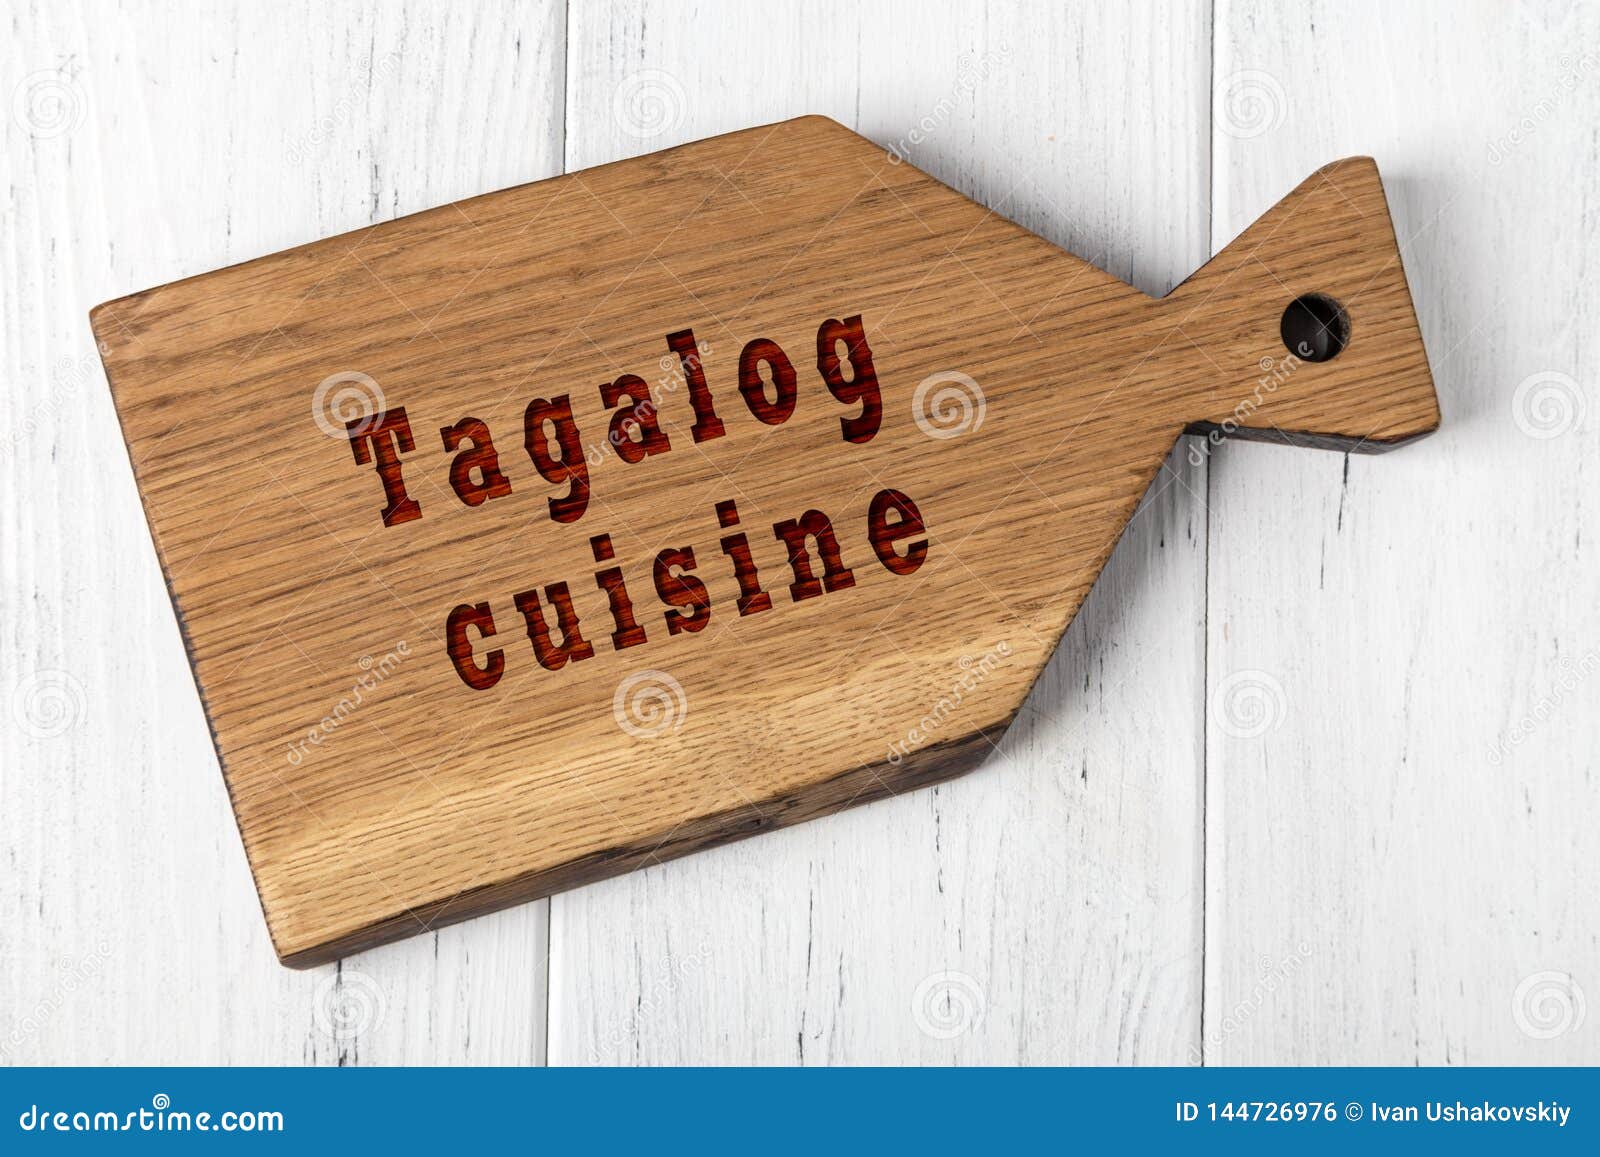 wooden cutting board with inscription. concept of tagalog cuisine